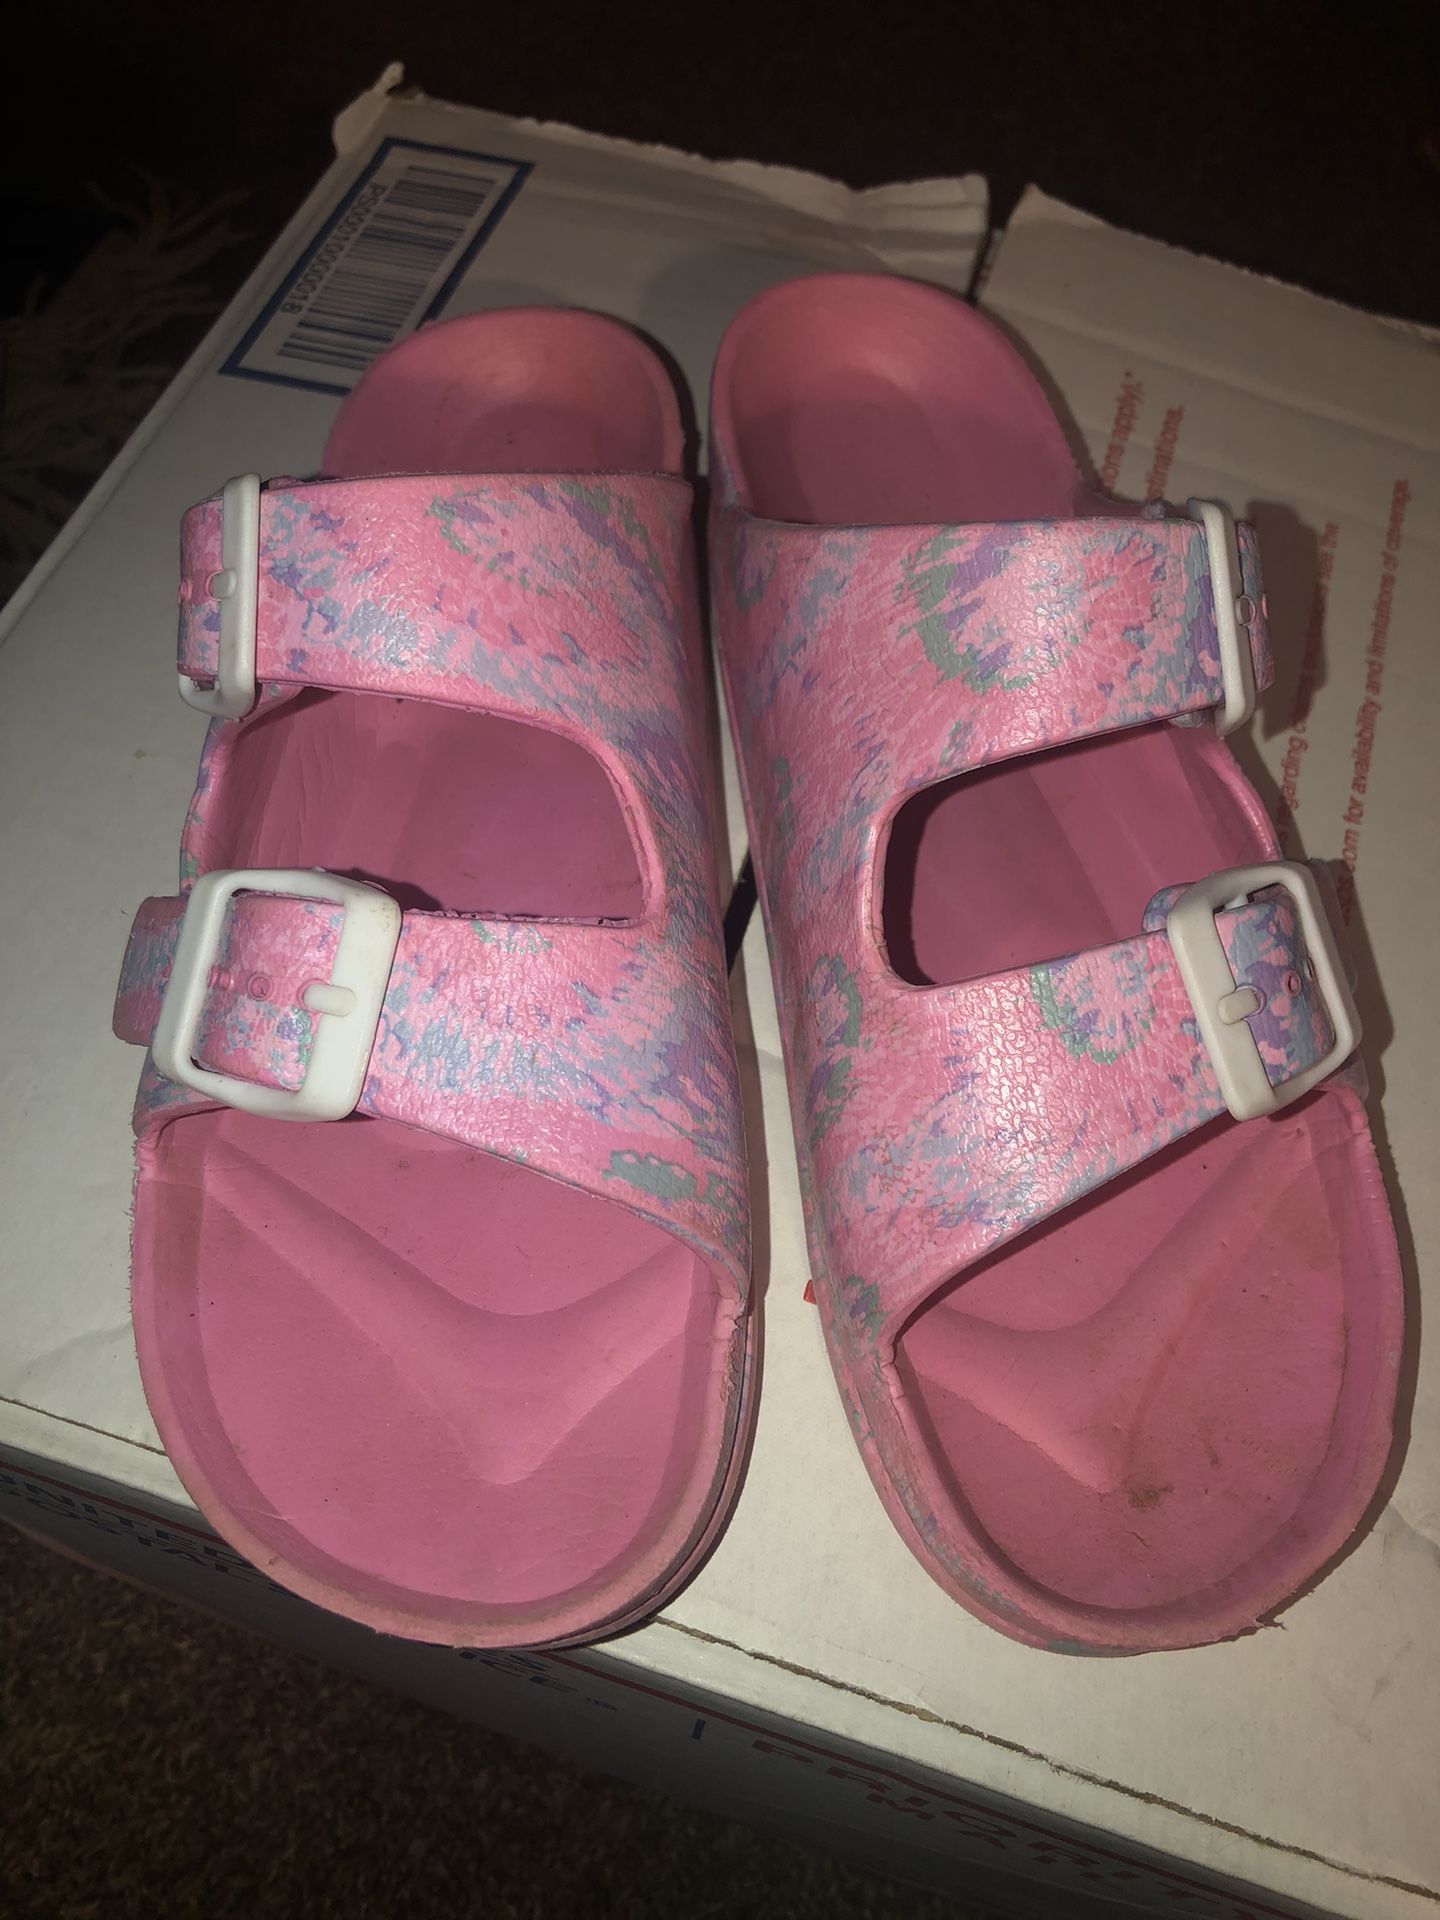 Girls Sandals  Pink  With Buckles. Size 1/2Y